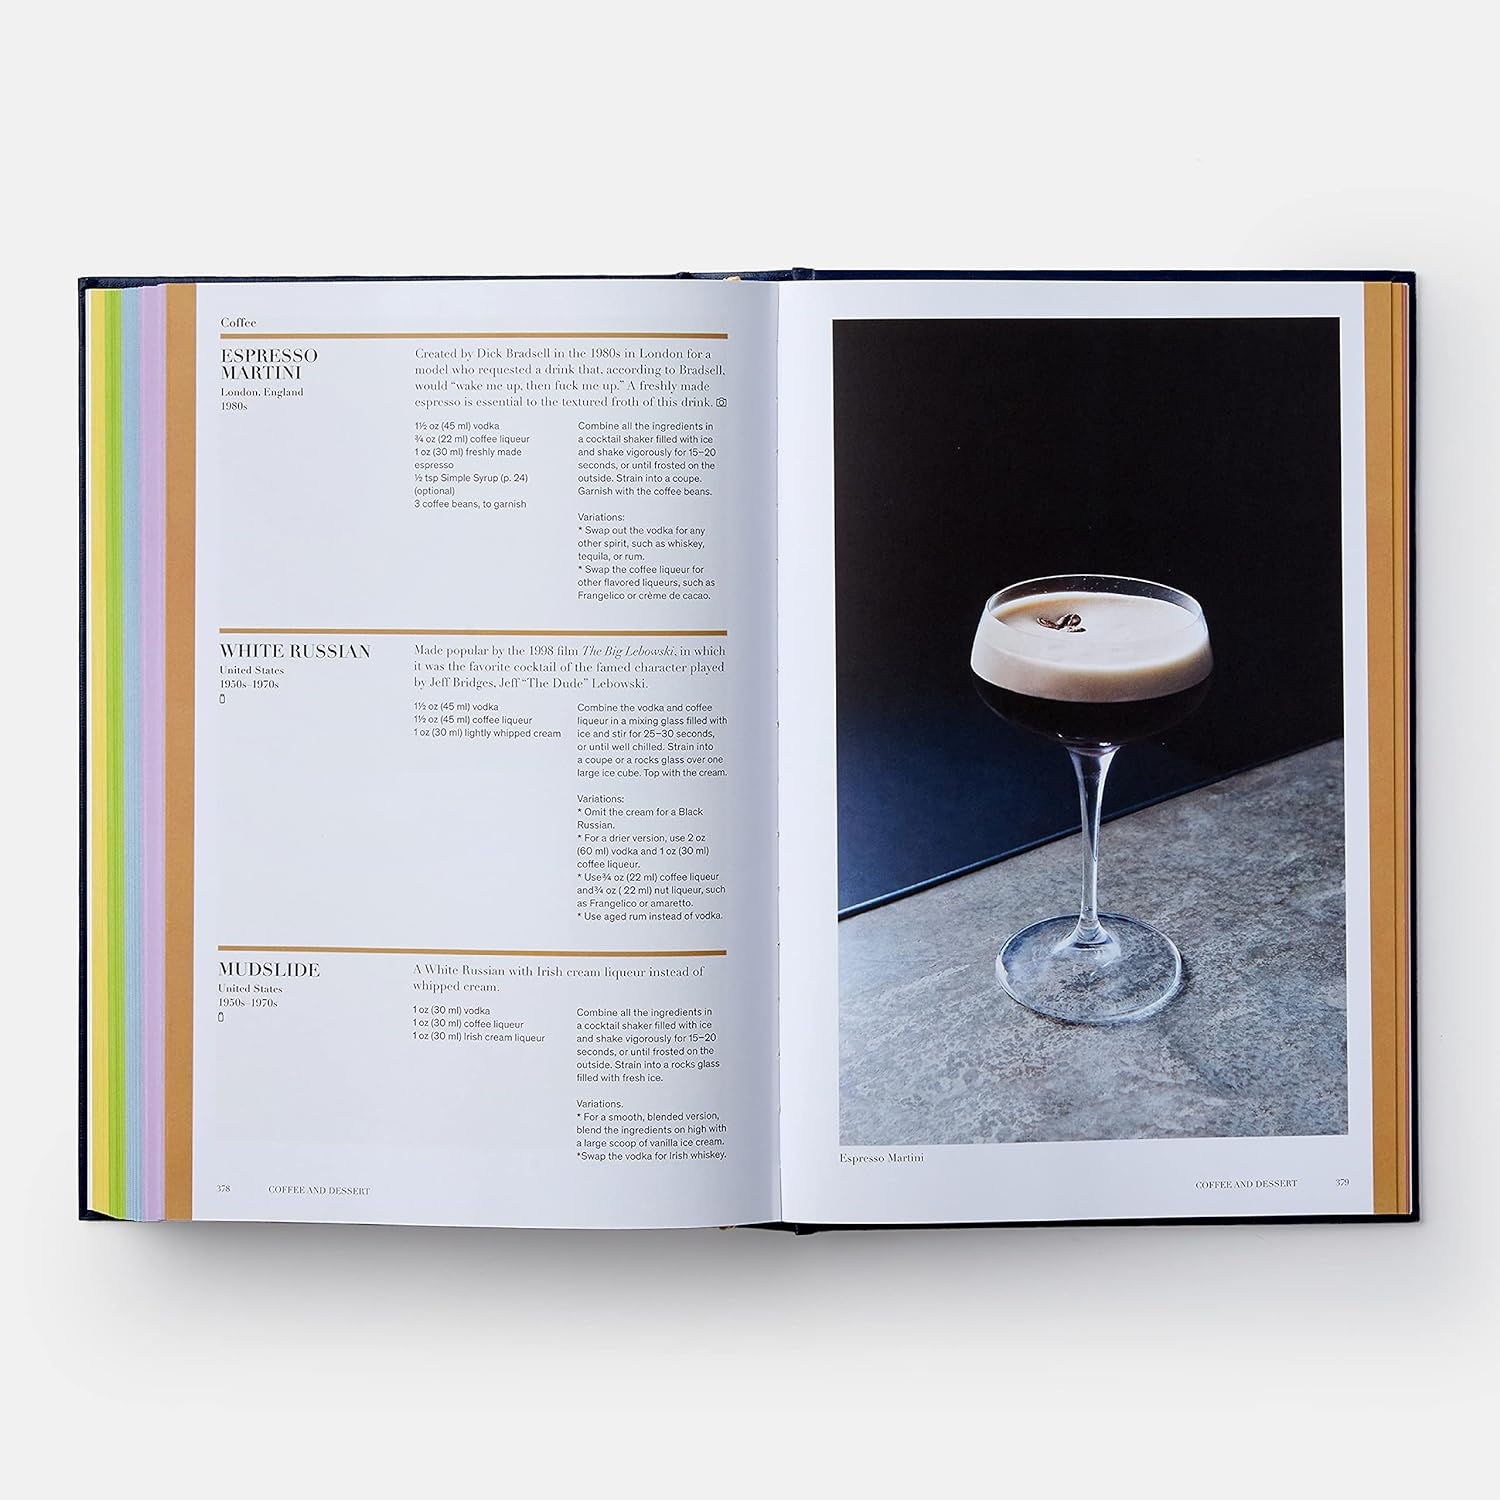 Spirited: Cocktails From Around the World. The ultimate guide to cocktails for every home and host – a luxurious, fully-illustrated, global celebration of classic and cutting-edge cocktails, packed with fascinating historical detail as well as more than 600 fail-safe recipes.